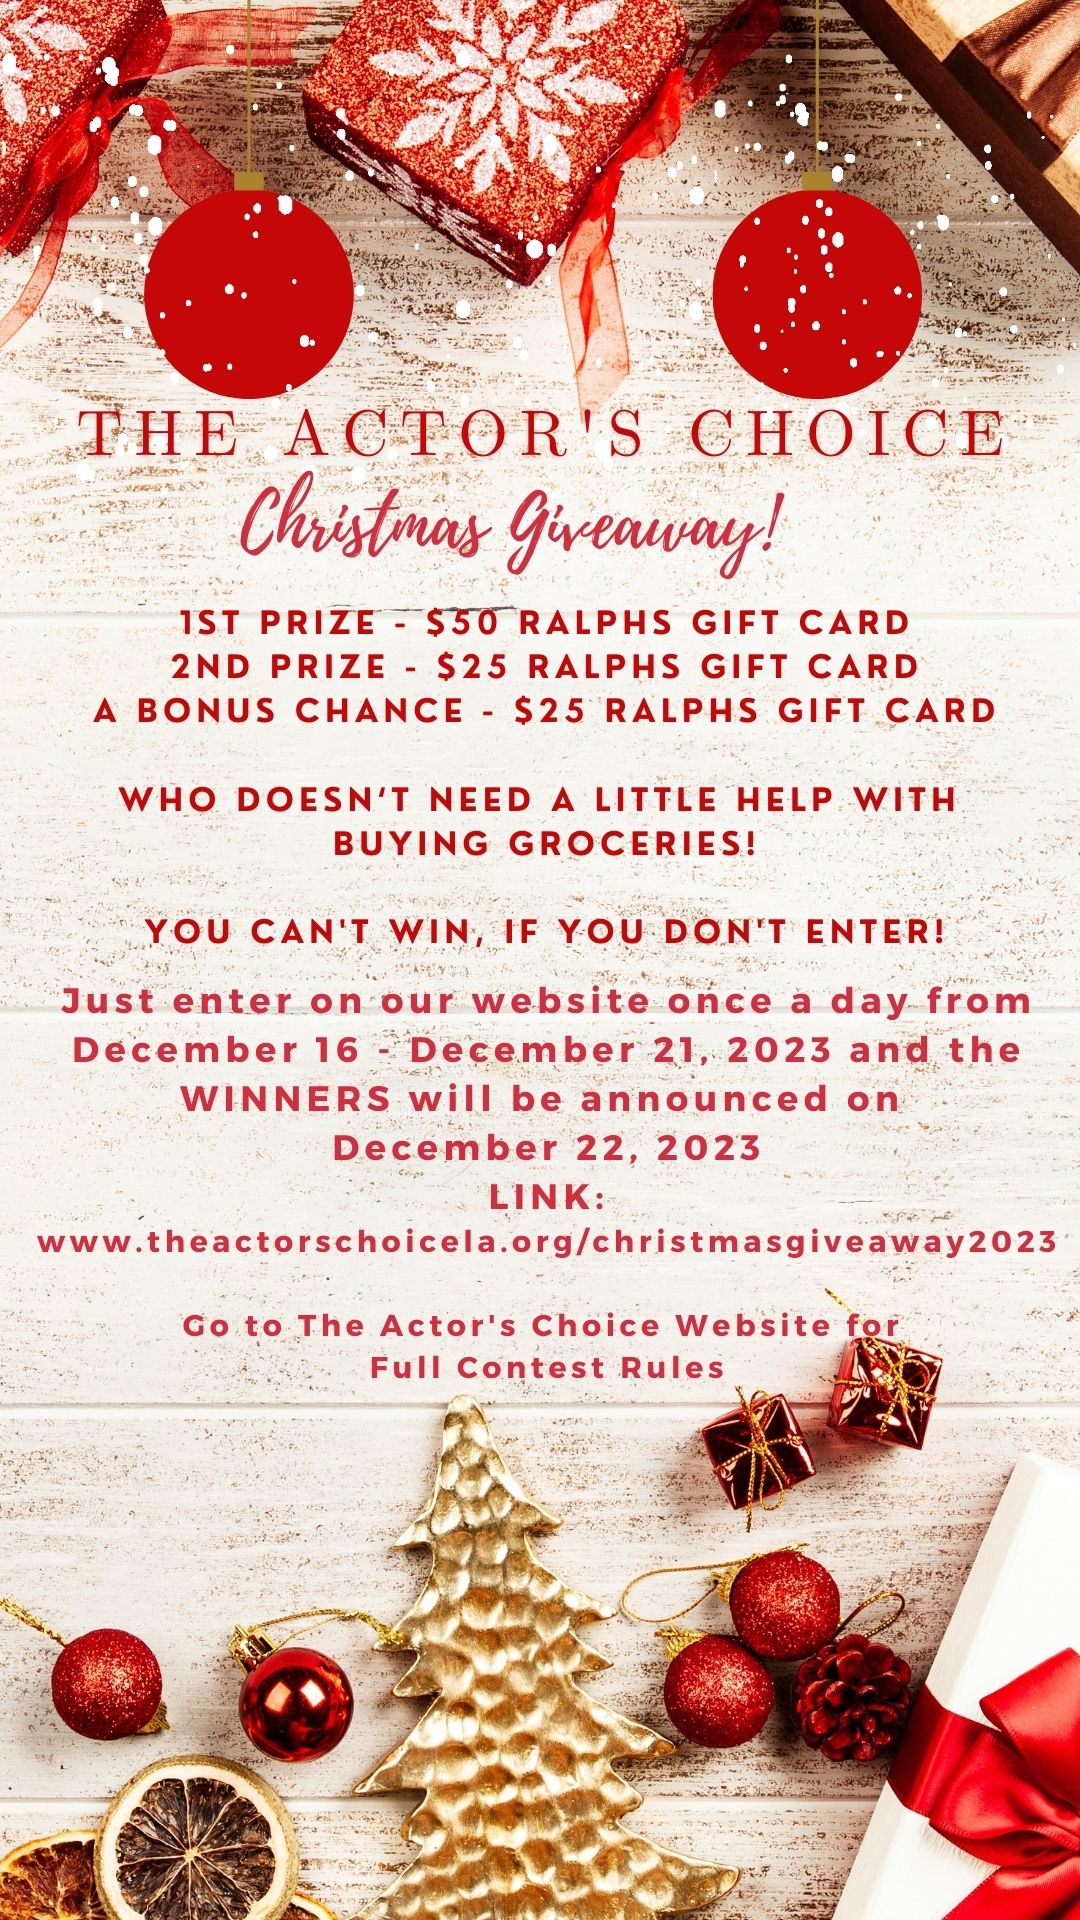 Holiday Giveaways: 16 prizes to enter to win!